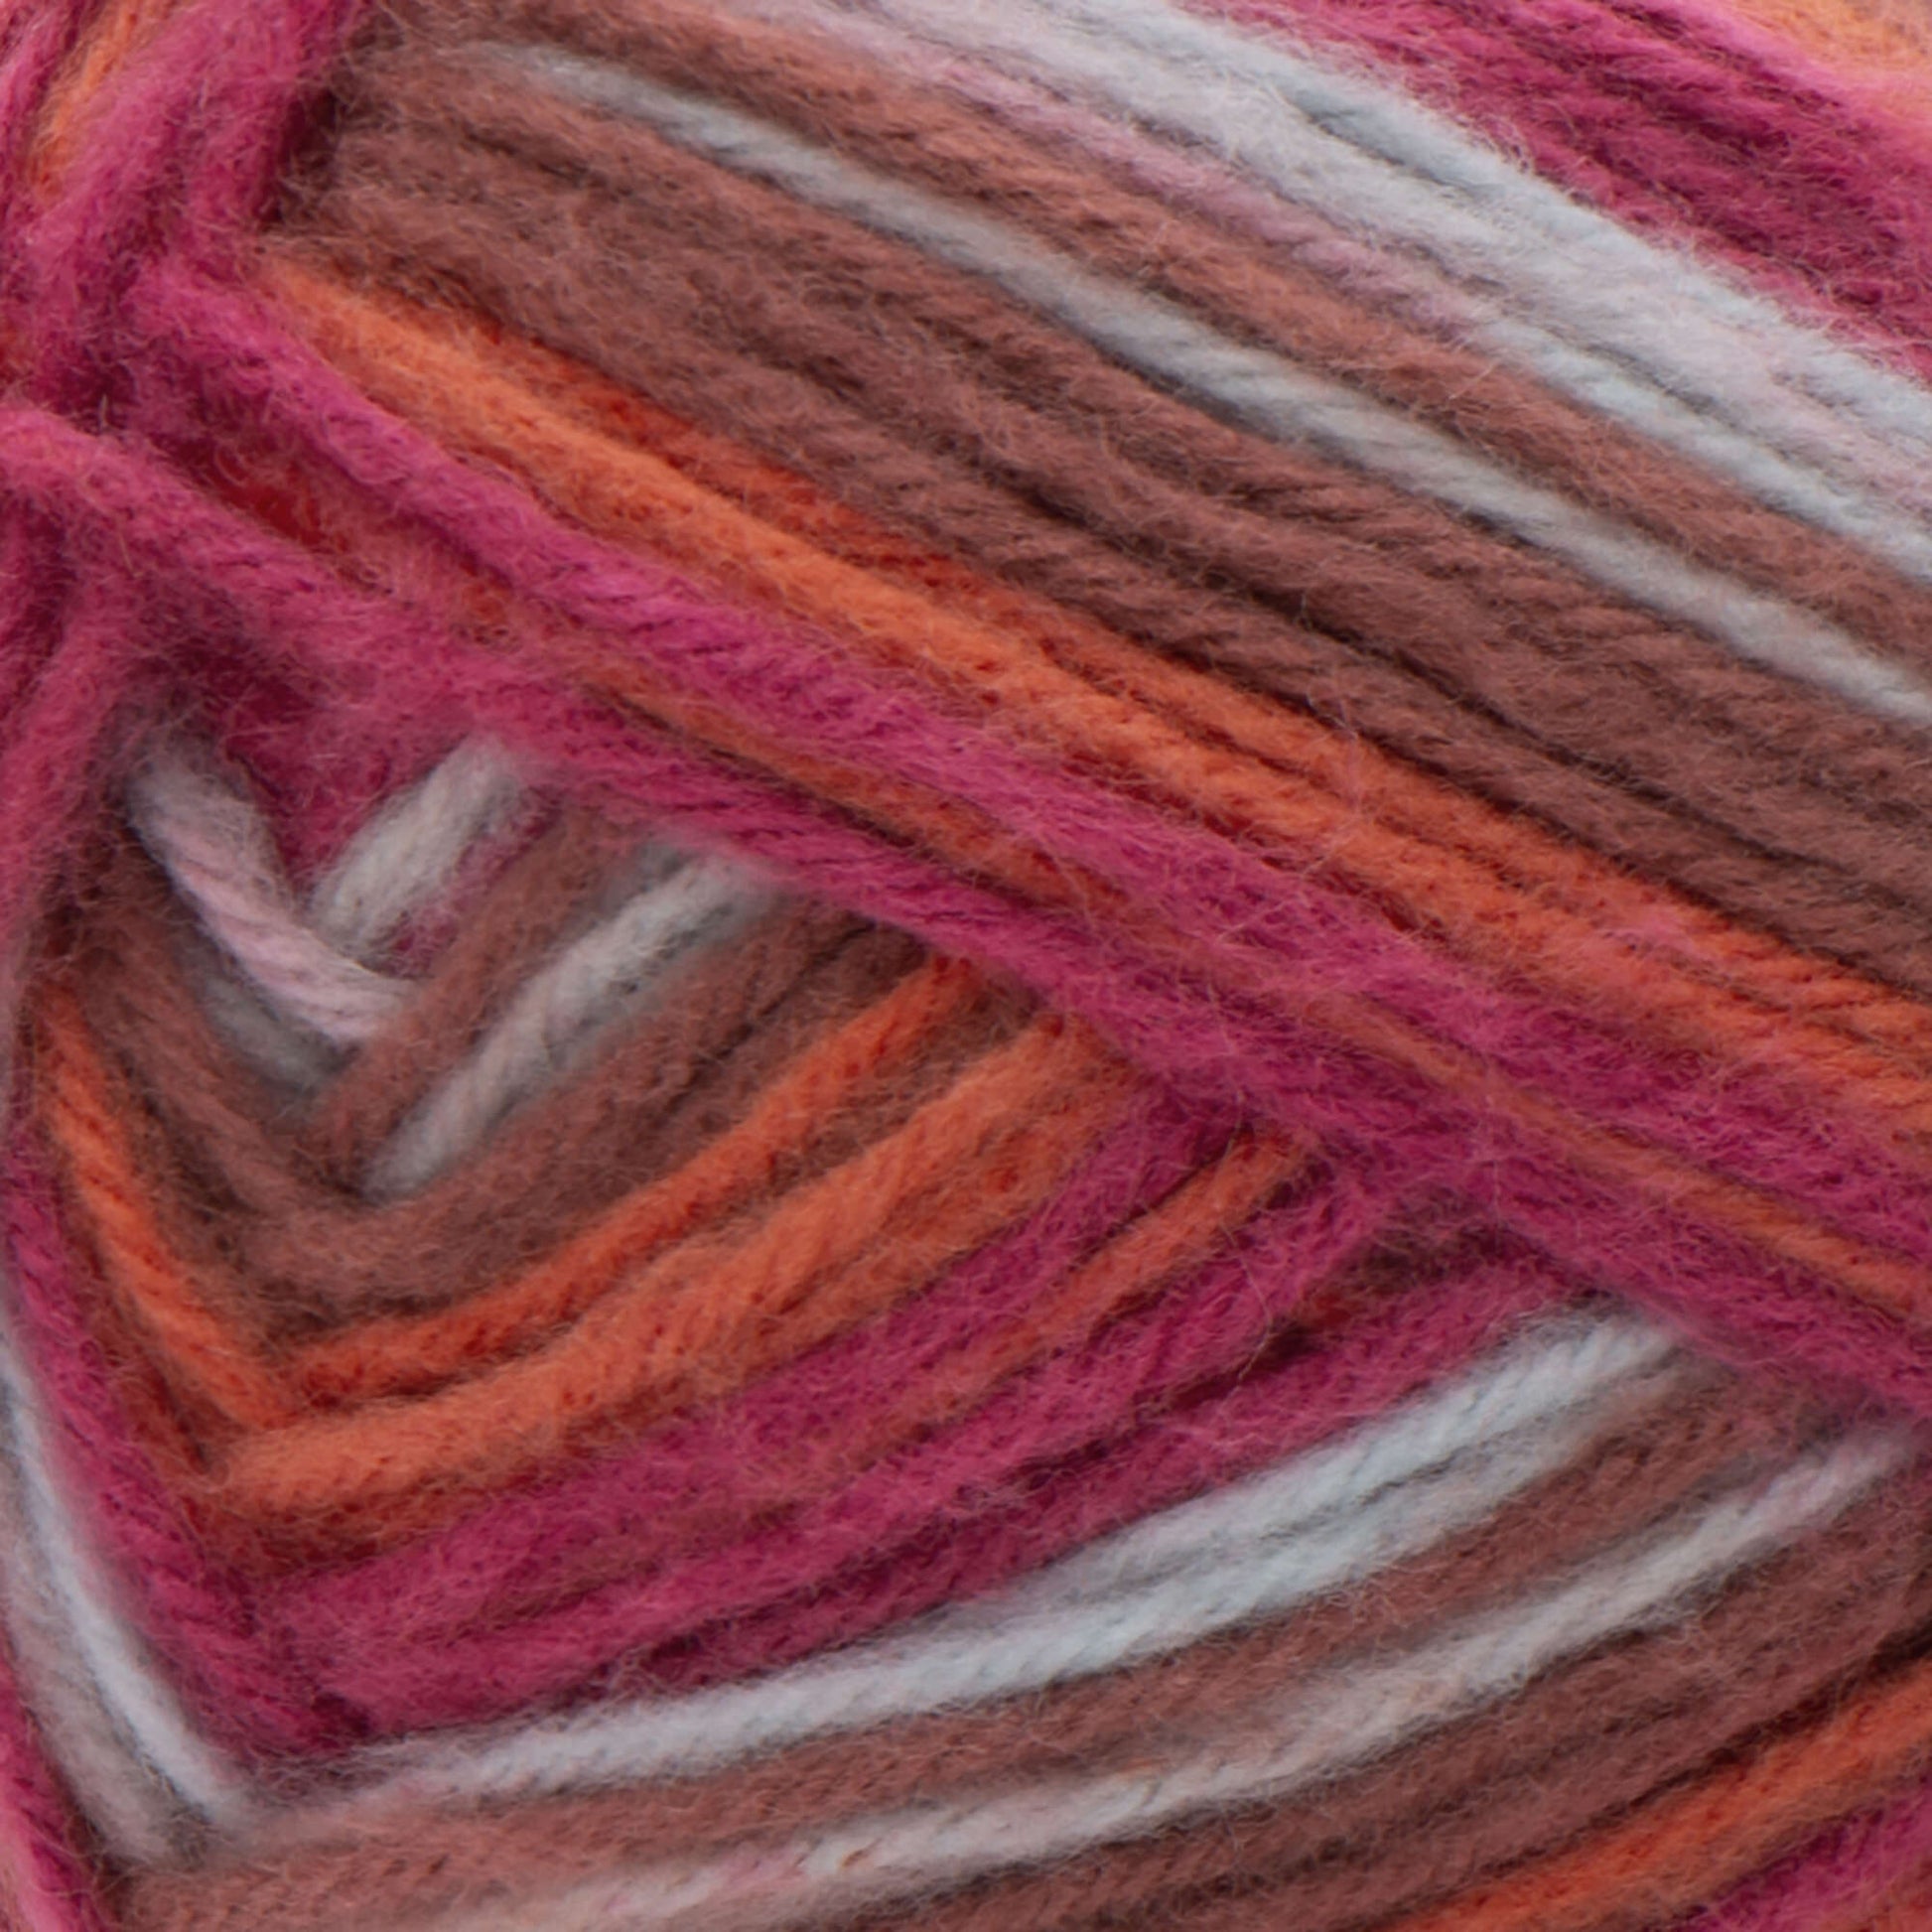 Red Heart Dreamy Stripes Yarn - Discontinued Shades